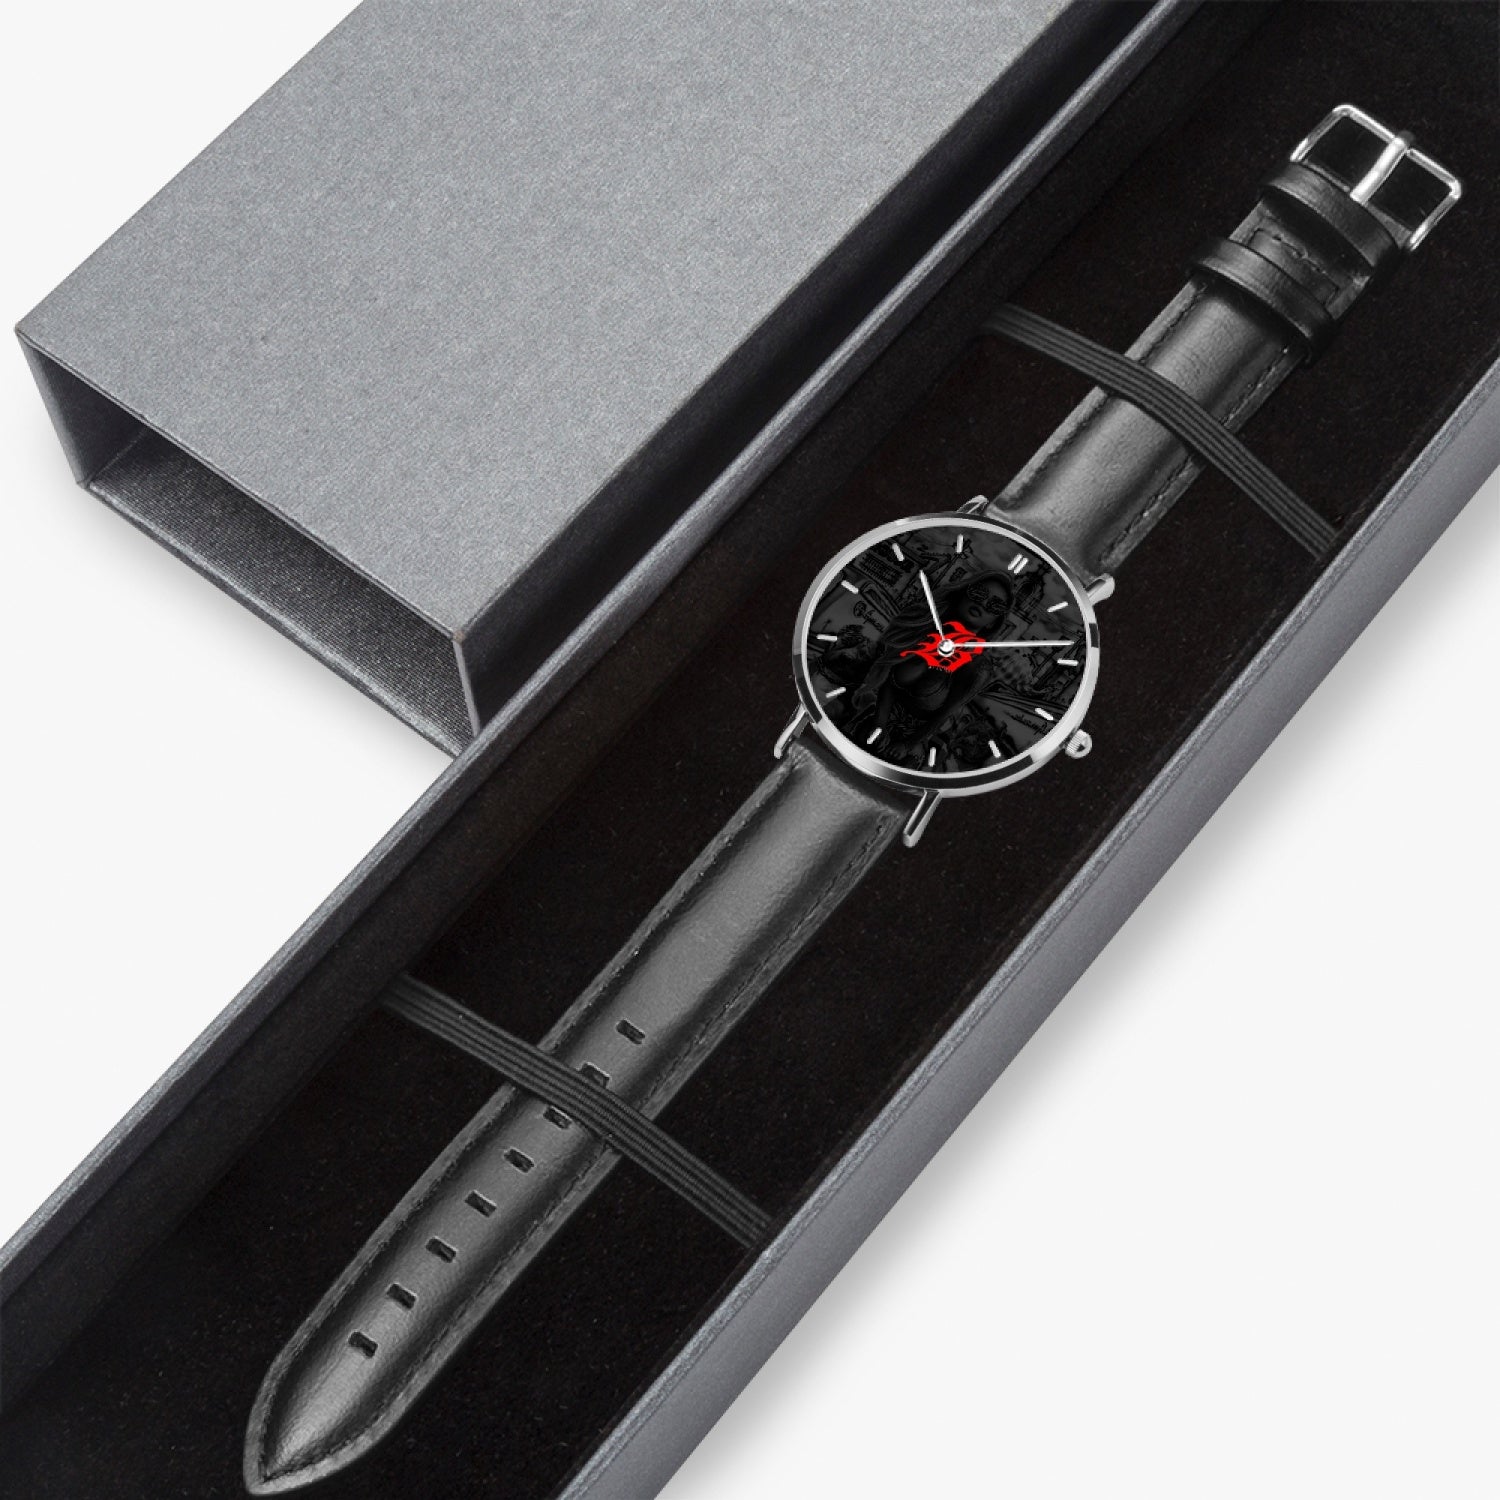 165. Hot Selling Ultra-Thin Leather Strap Quartz Watch (Silver With Indicators) - GHETTO LOVE